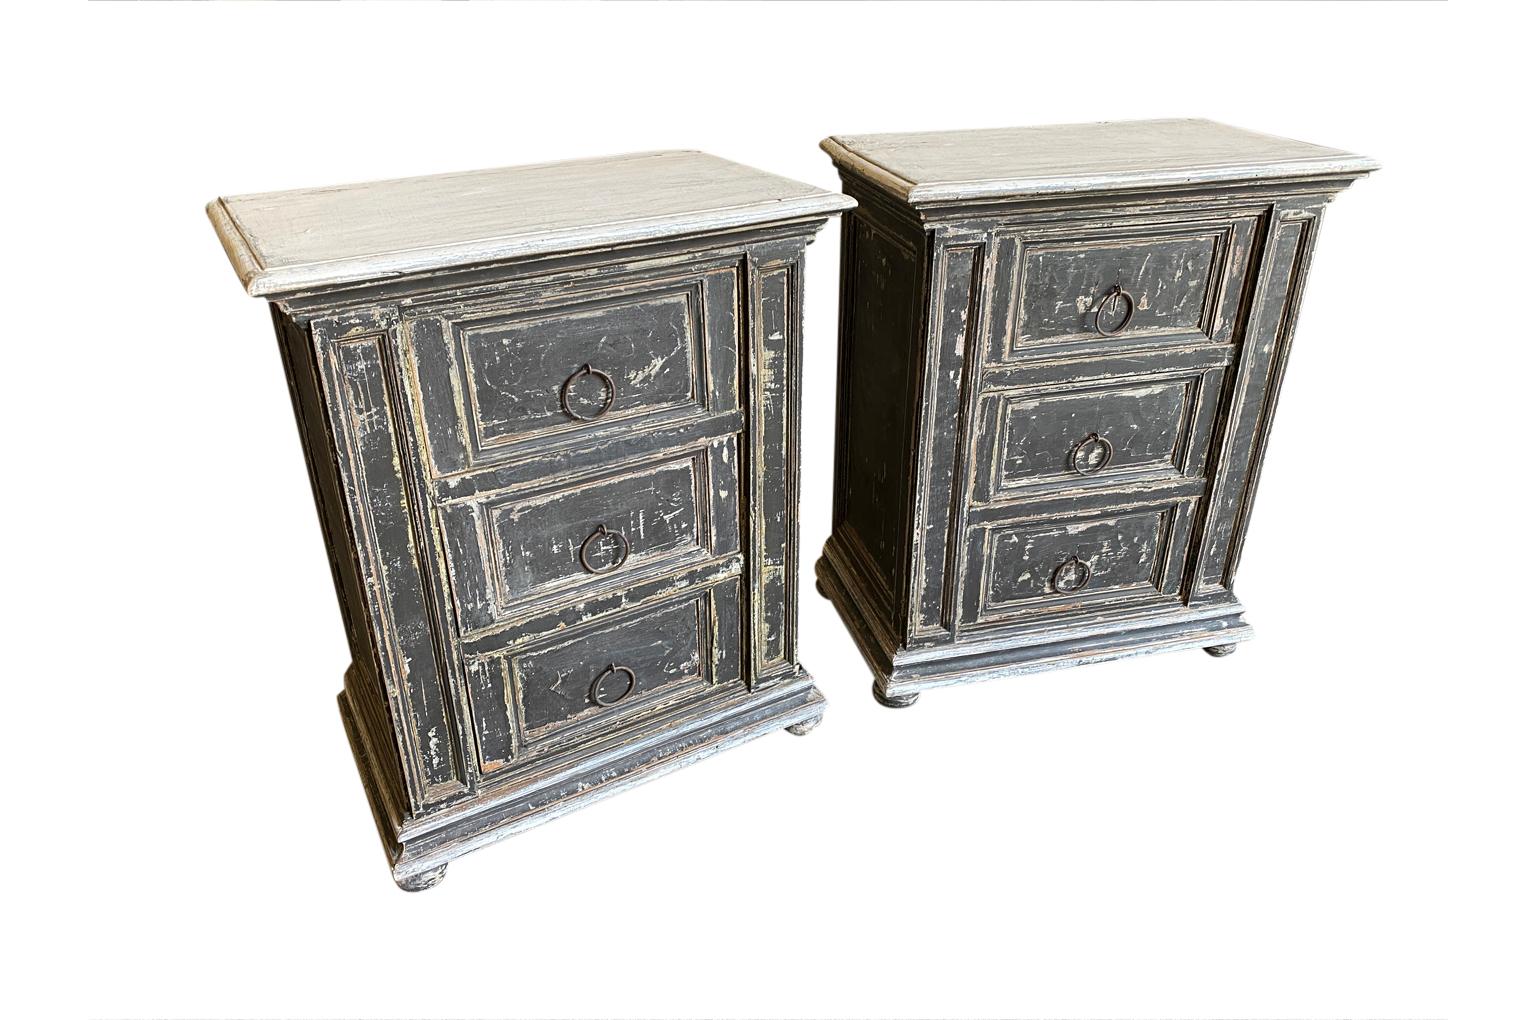 A very charming pair of late 19th century Italian comodini in painted wood with 3 drawers resting on bun feet. Perfect bedside side cabinets.